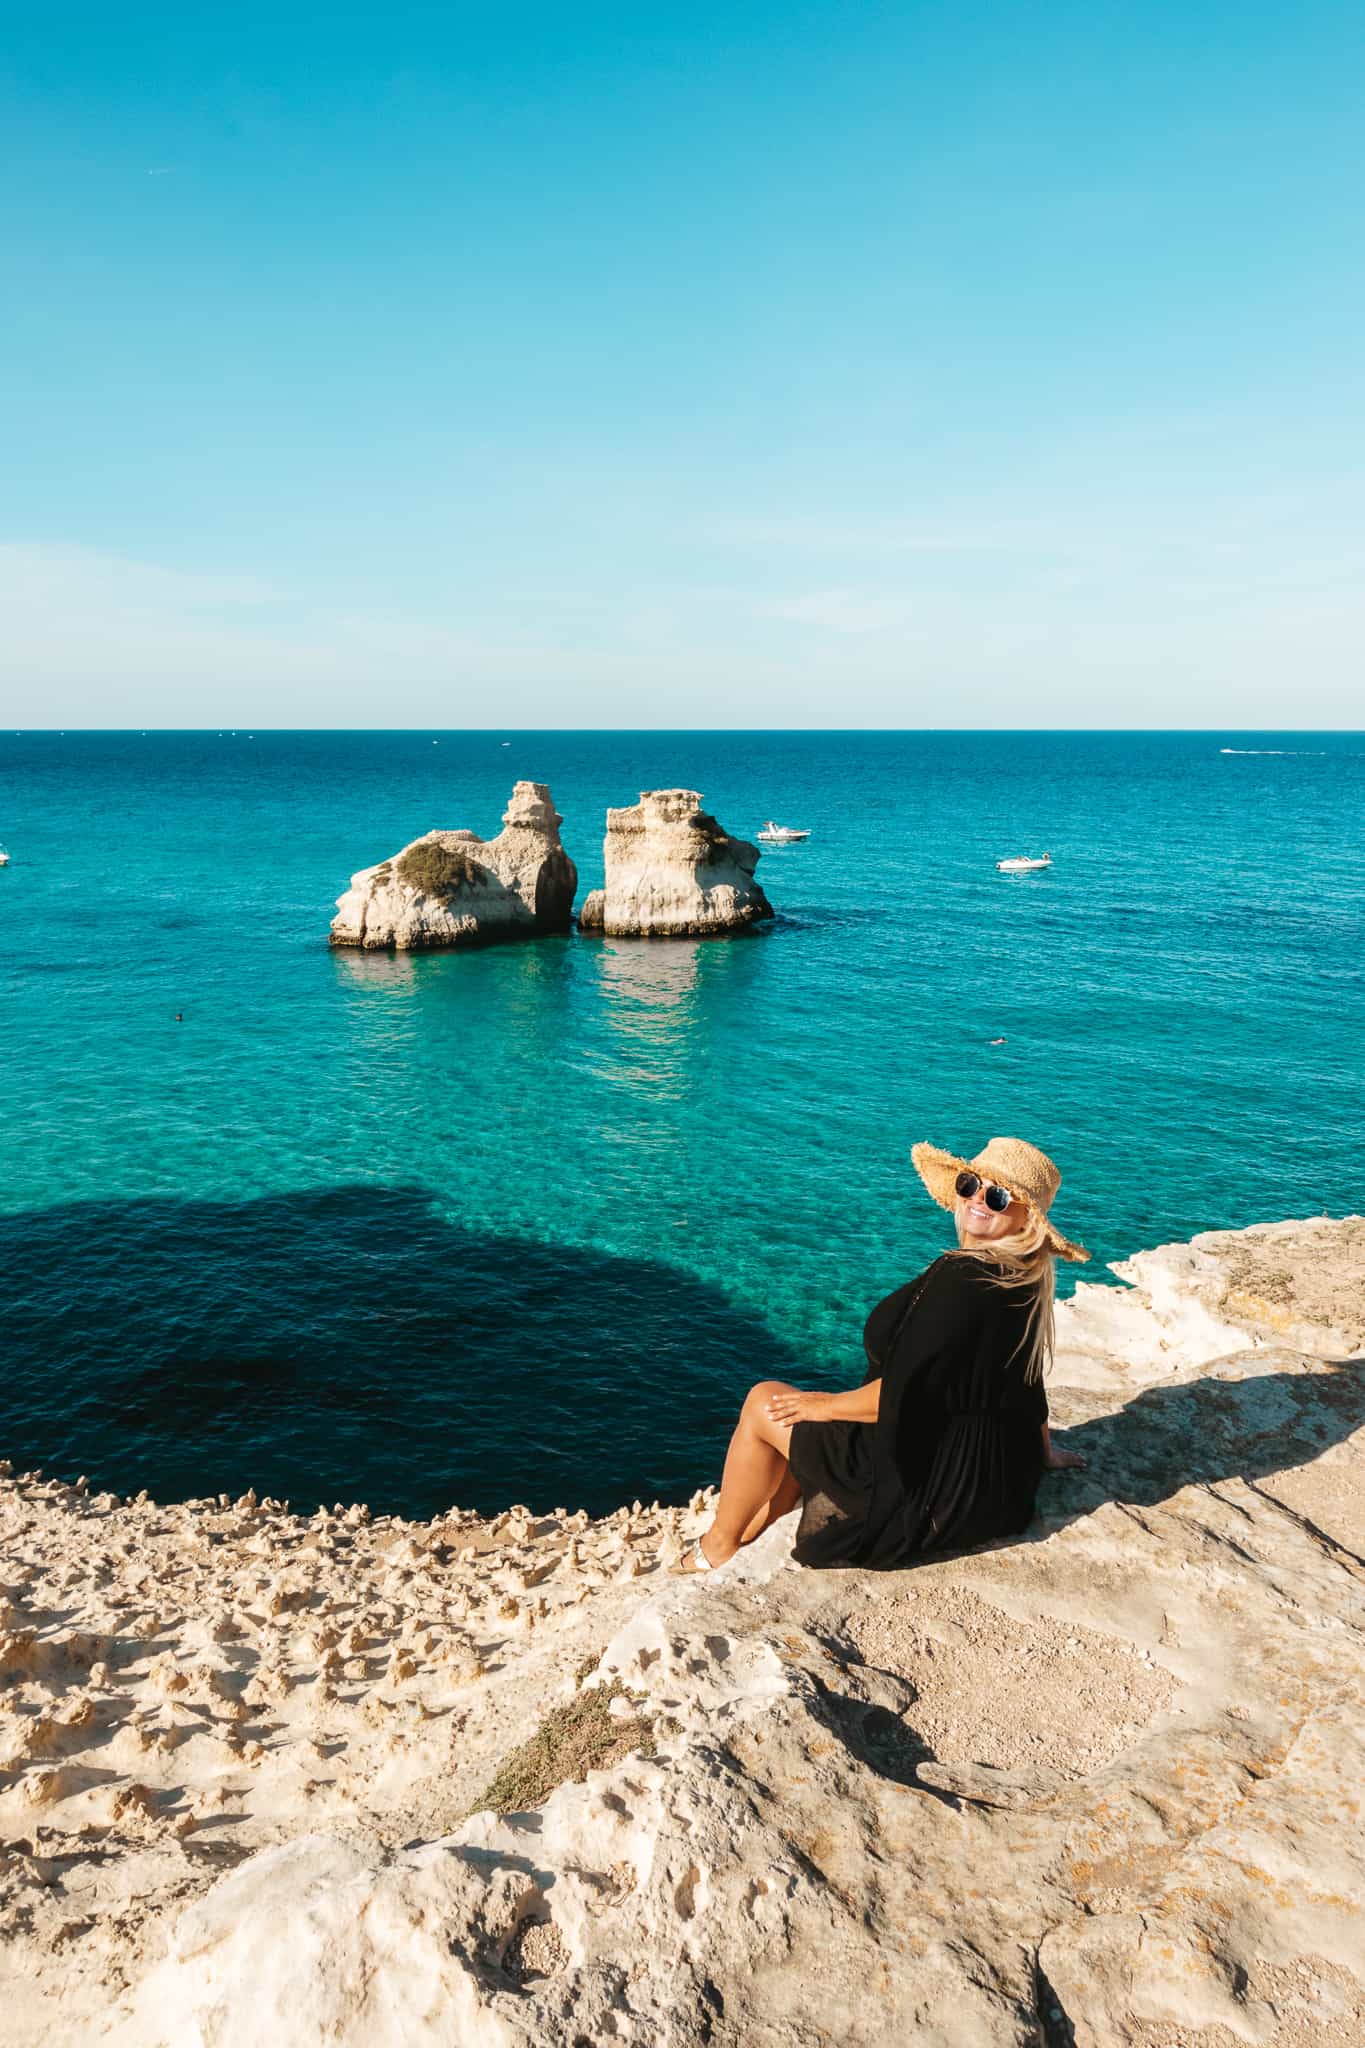 Taking in the views of Le Due Sorelle at Torre dell'Orso